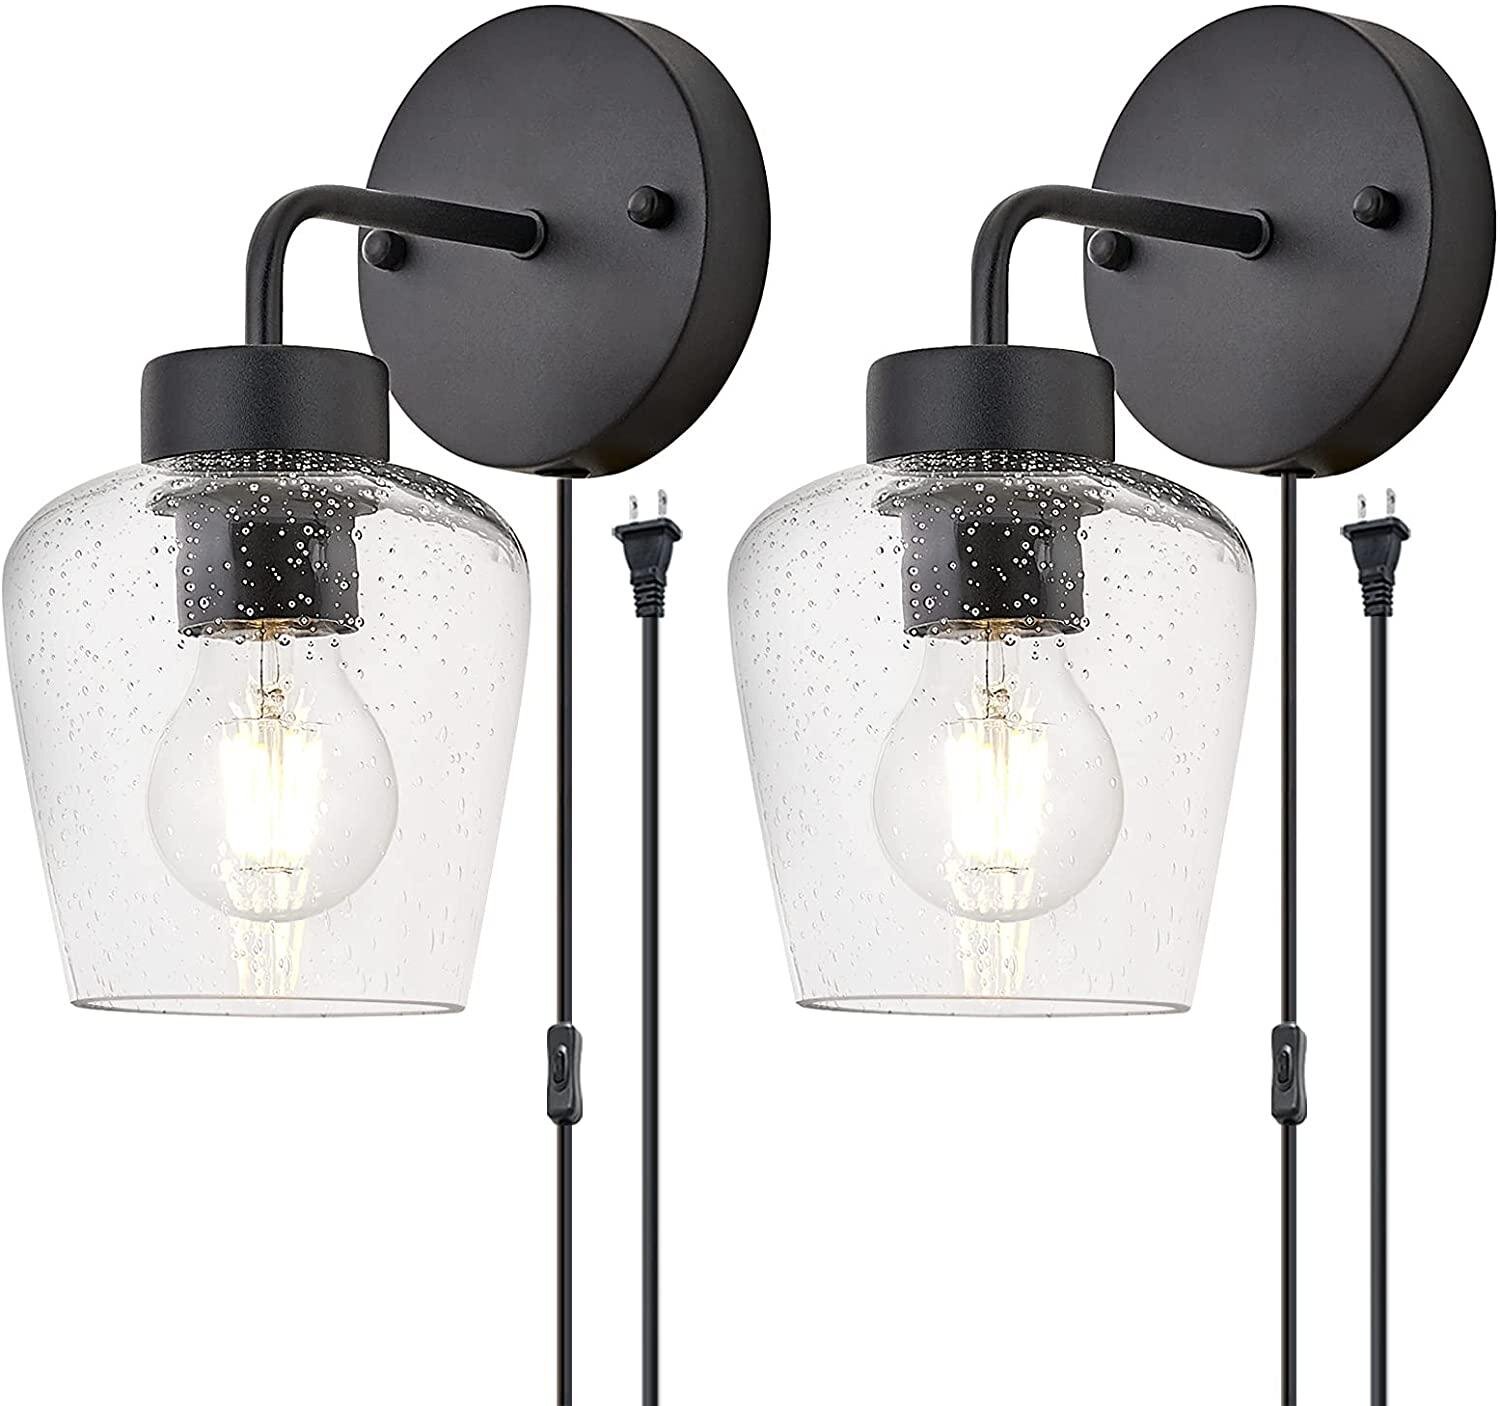 Plug in Wall Sconce Set of 2,Clear Glass Shade Matte Black Wall Lamps with ON/Off Cord,for Bedroom,Stair,Reading,Bedside,Living Room,Dining Room